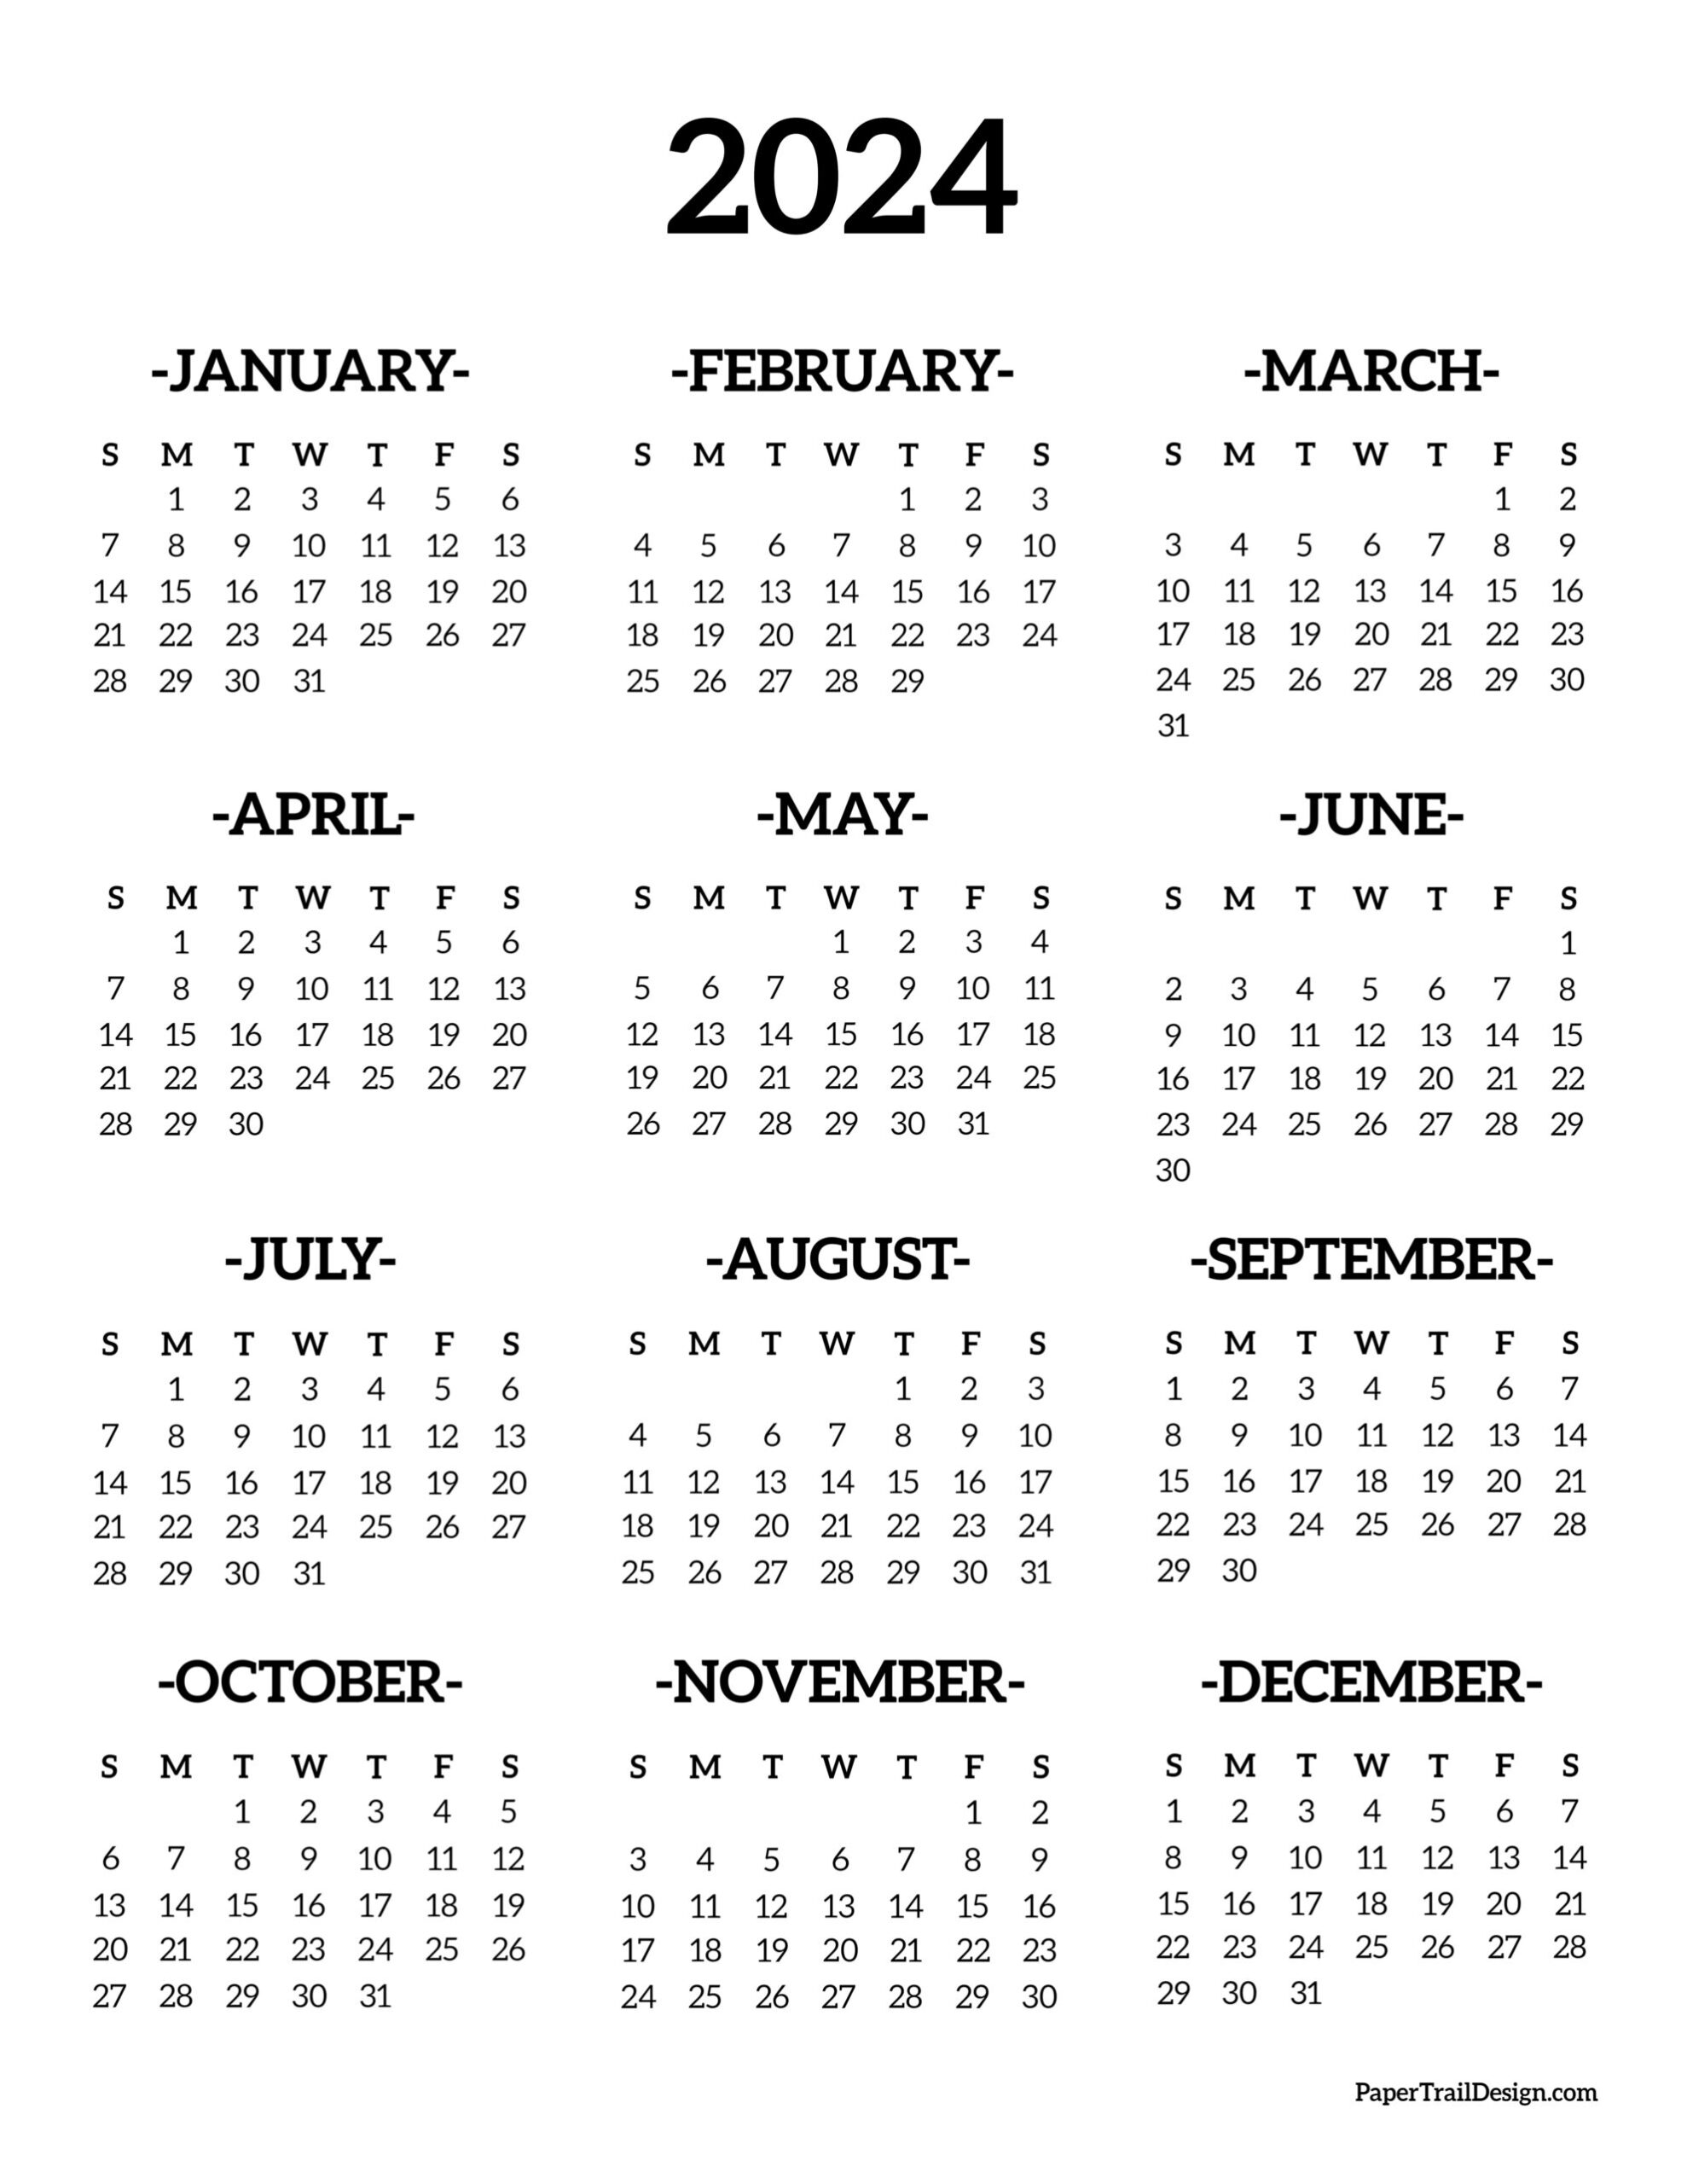 Calendar 2024 Printable One Page - Paper Trail Design for Printable 2024 Full Year Calendar